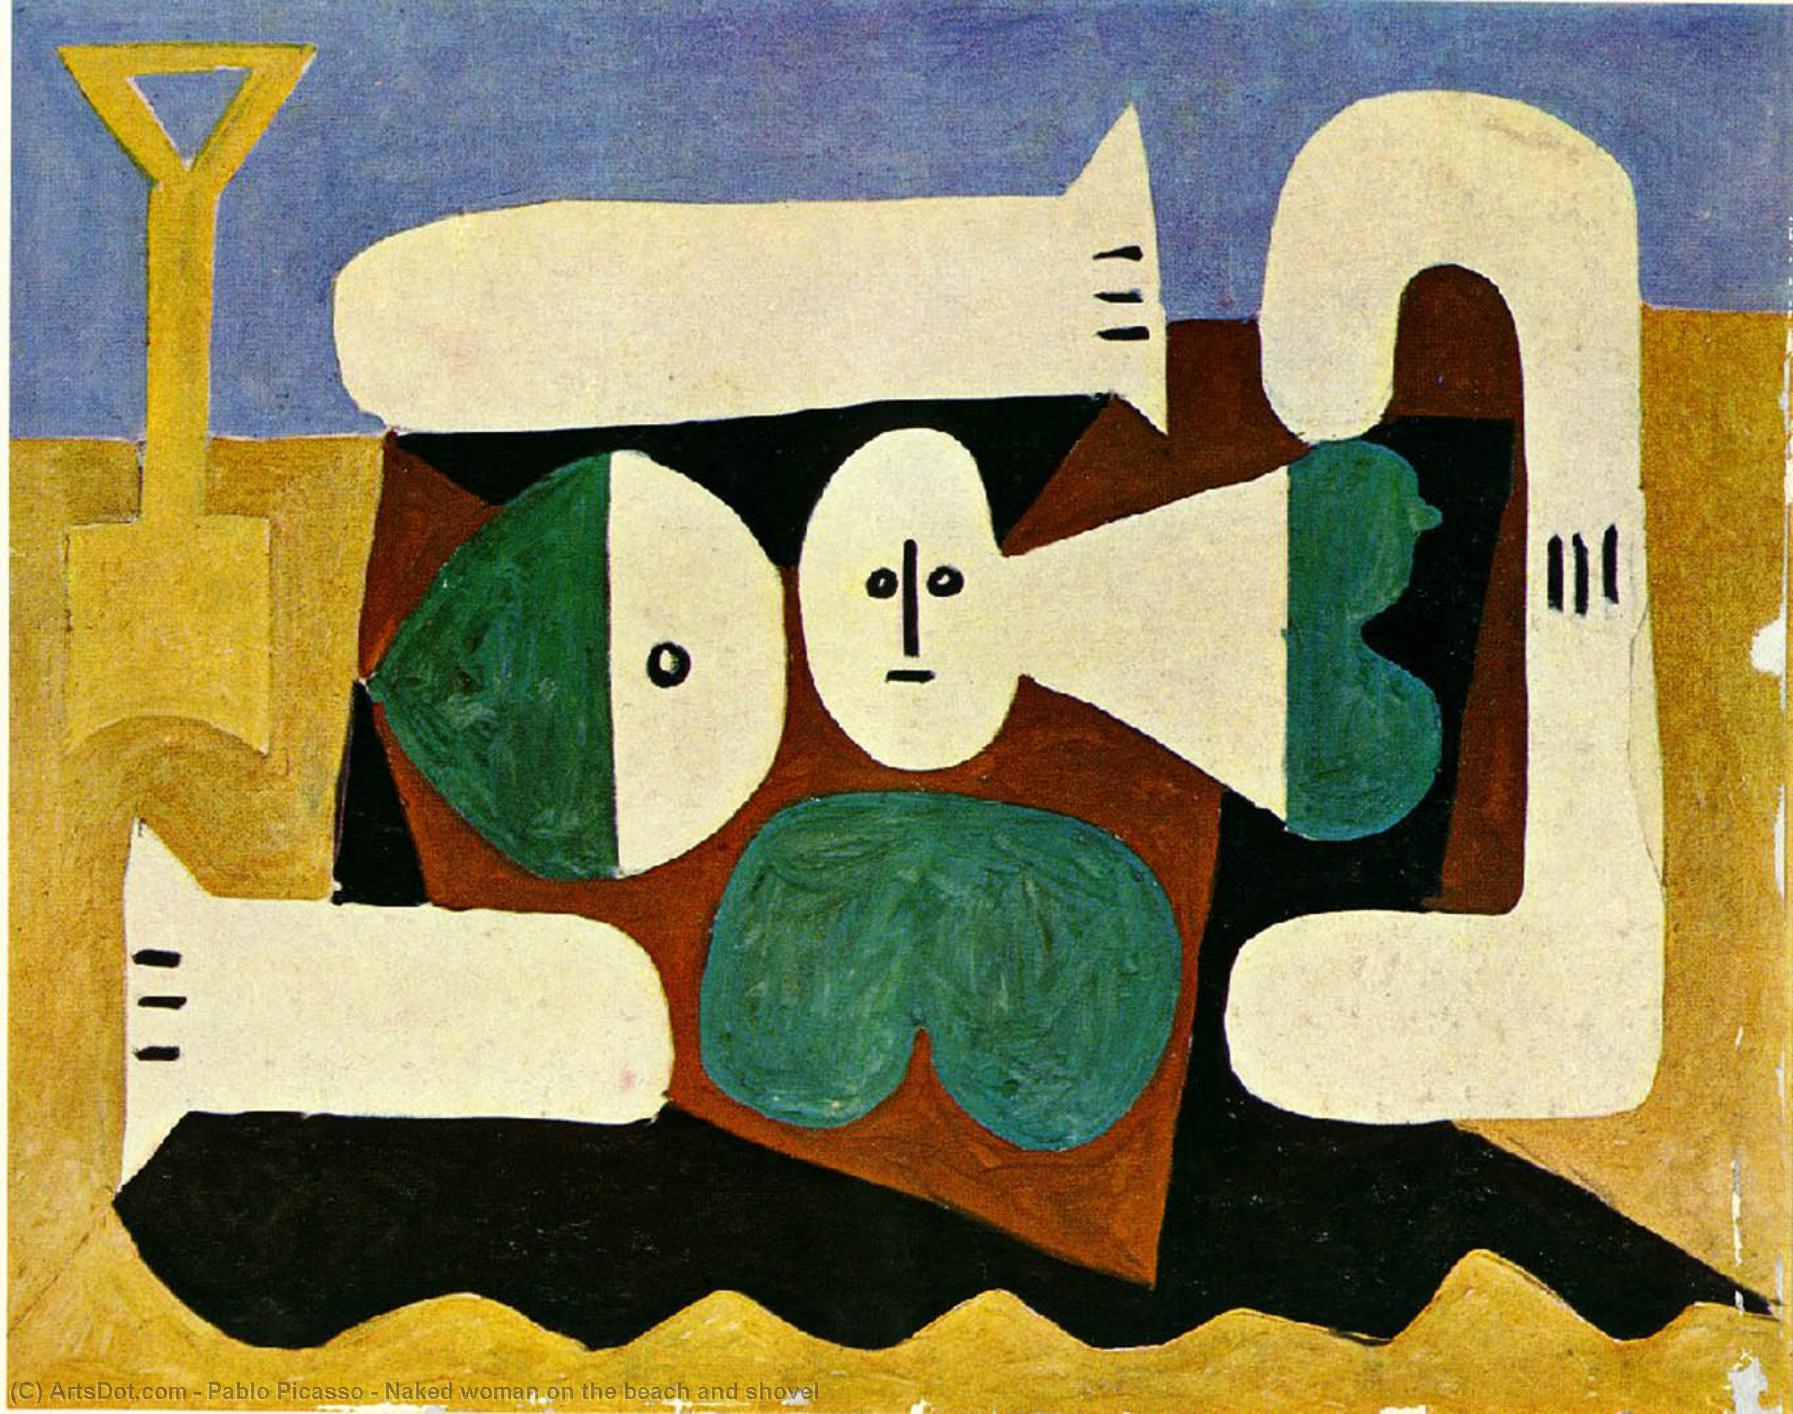 WikiOO.org - Encyclopedia of Fine Arts - Maleri, Artwork Pablo Picasso - Naked woman on the beach and shovel